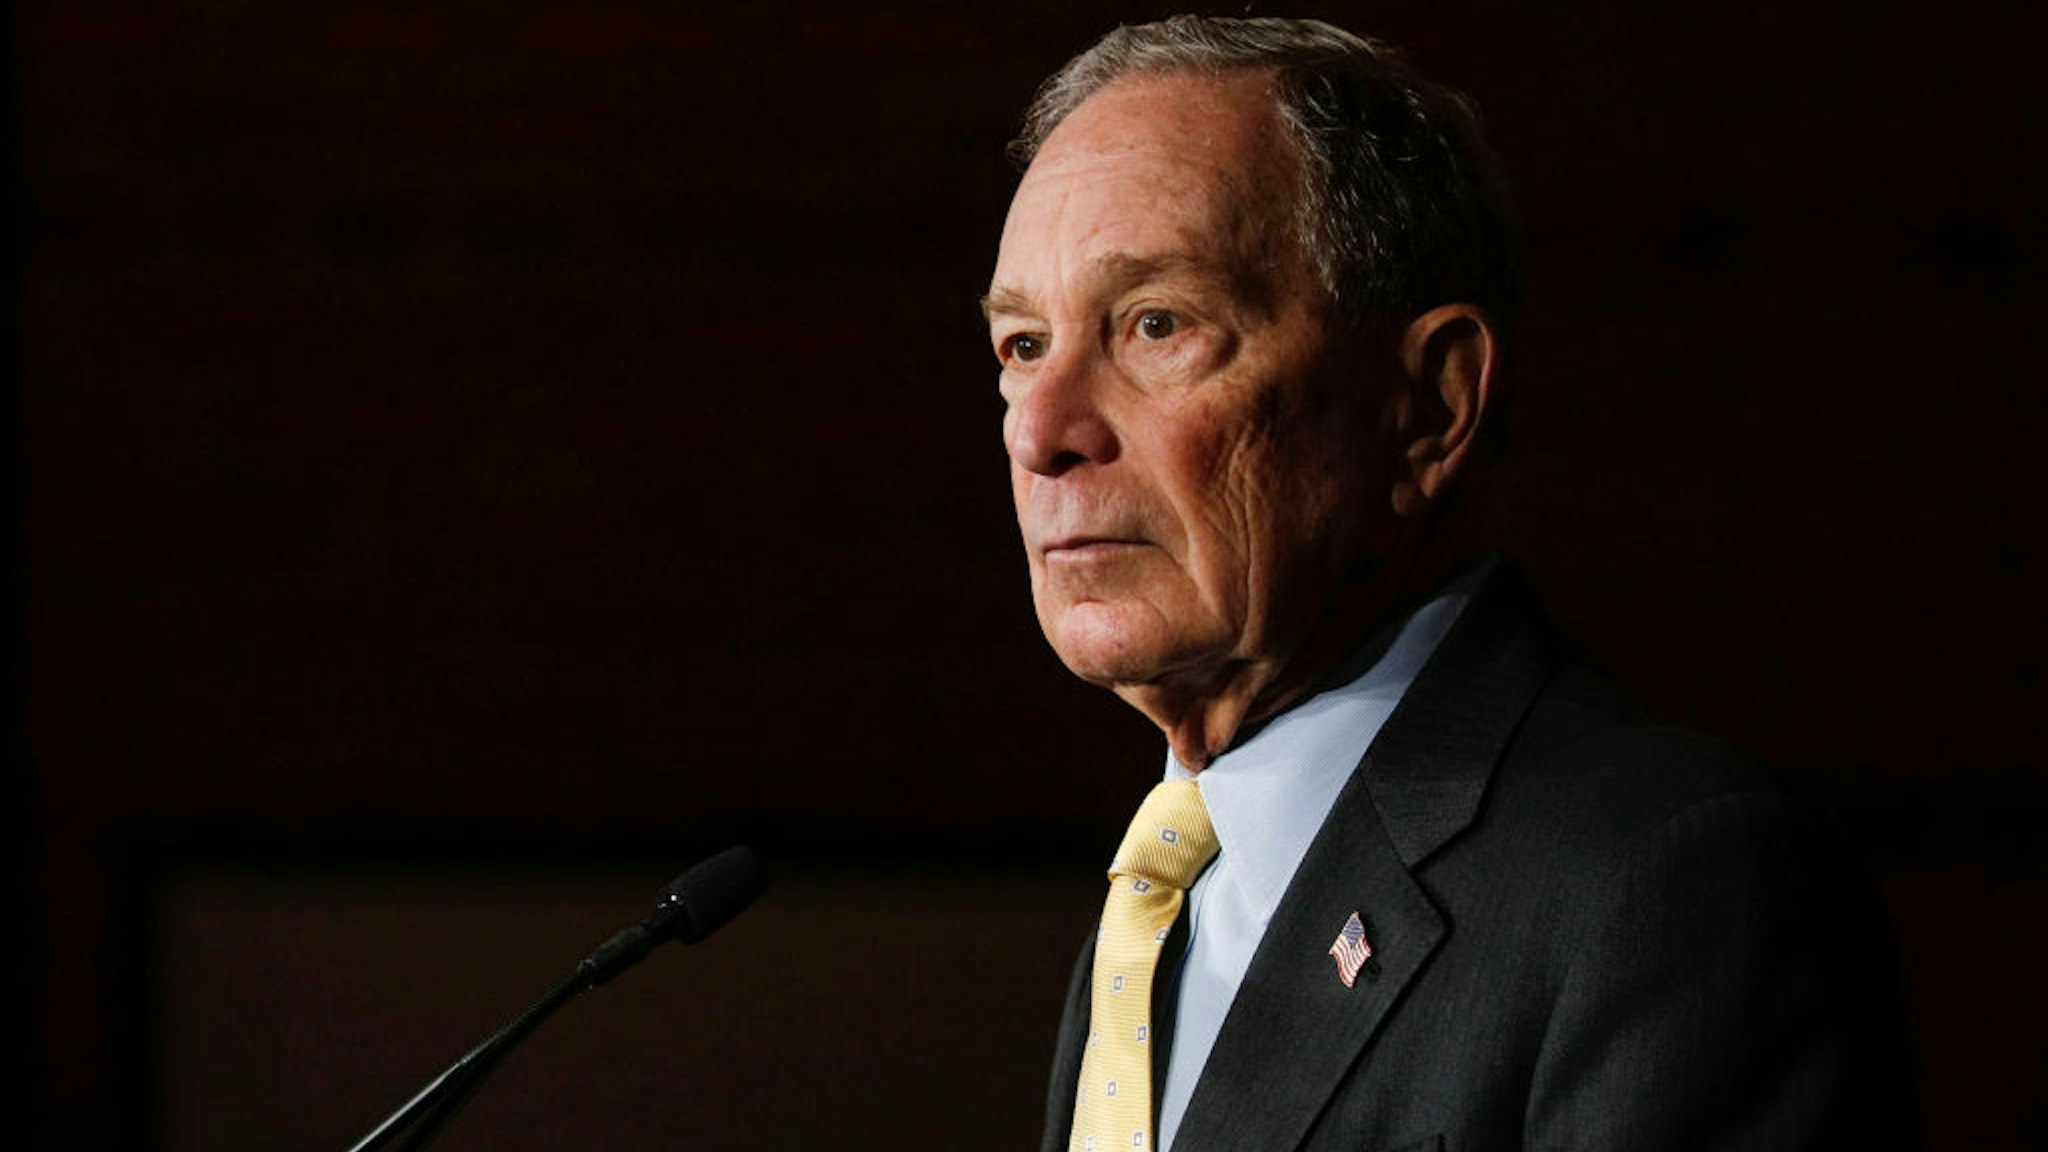 Democratic presidential candidate Mike Bloomberg holds a campaign rally on February 4, 2020 in Detroit, Michigan.